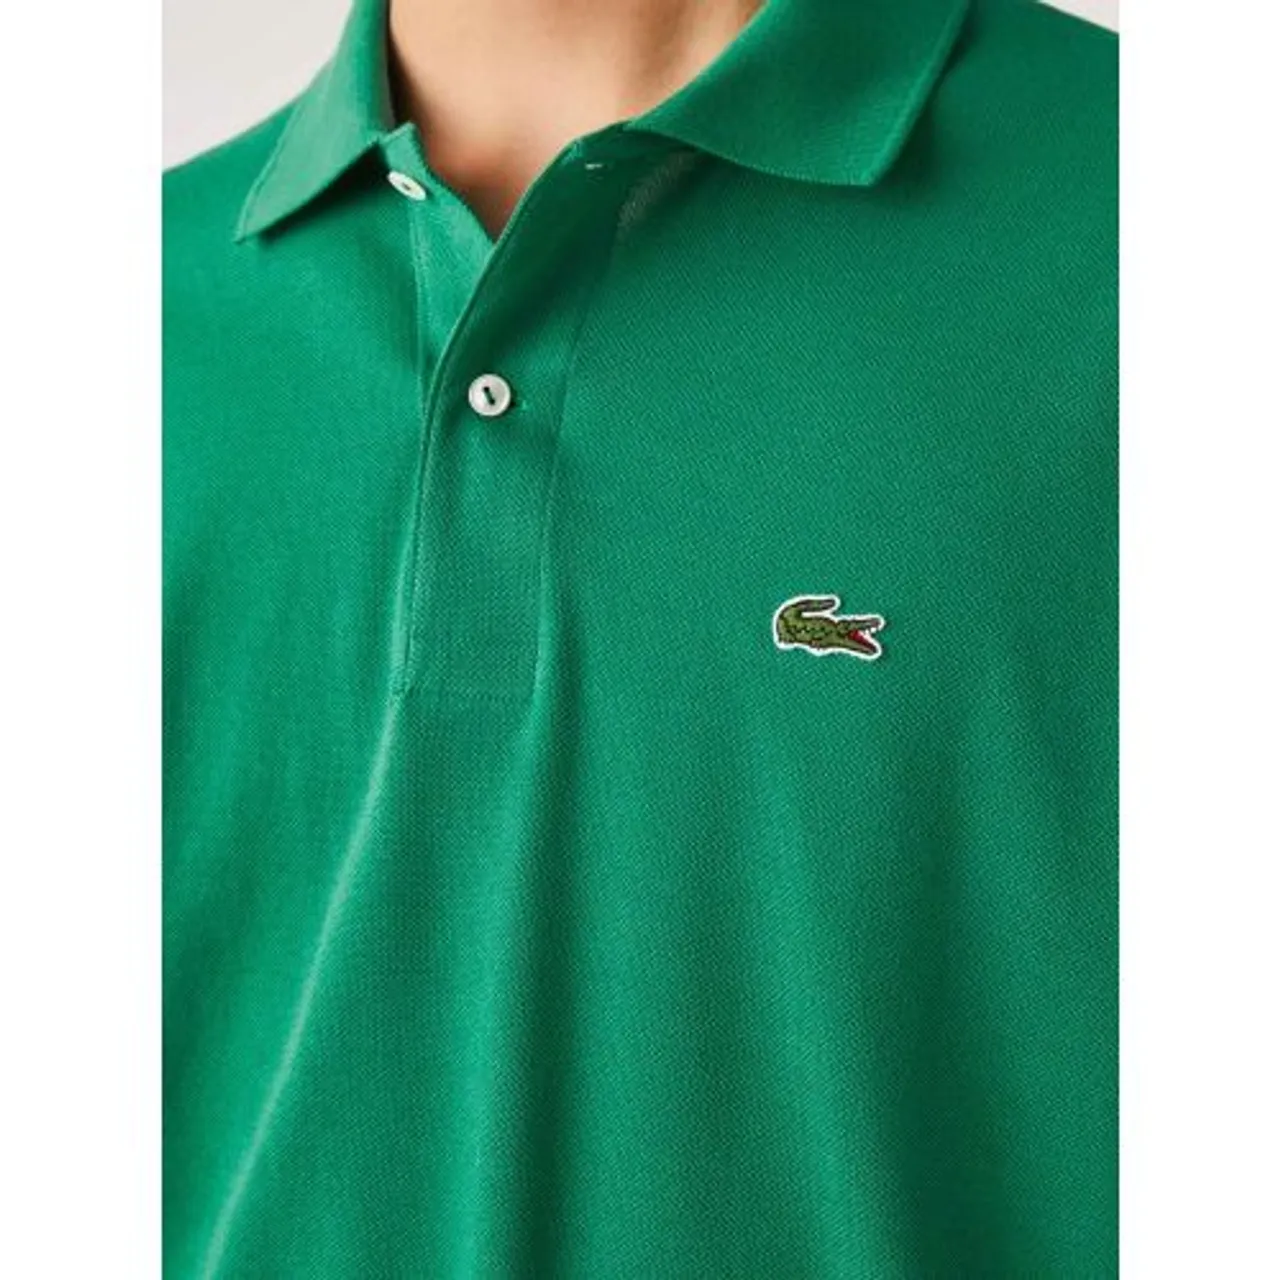 Lacoste Fluorine Green Classic Fit Short Sleeve L1212 Polo Shirt